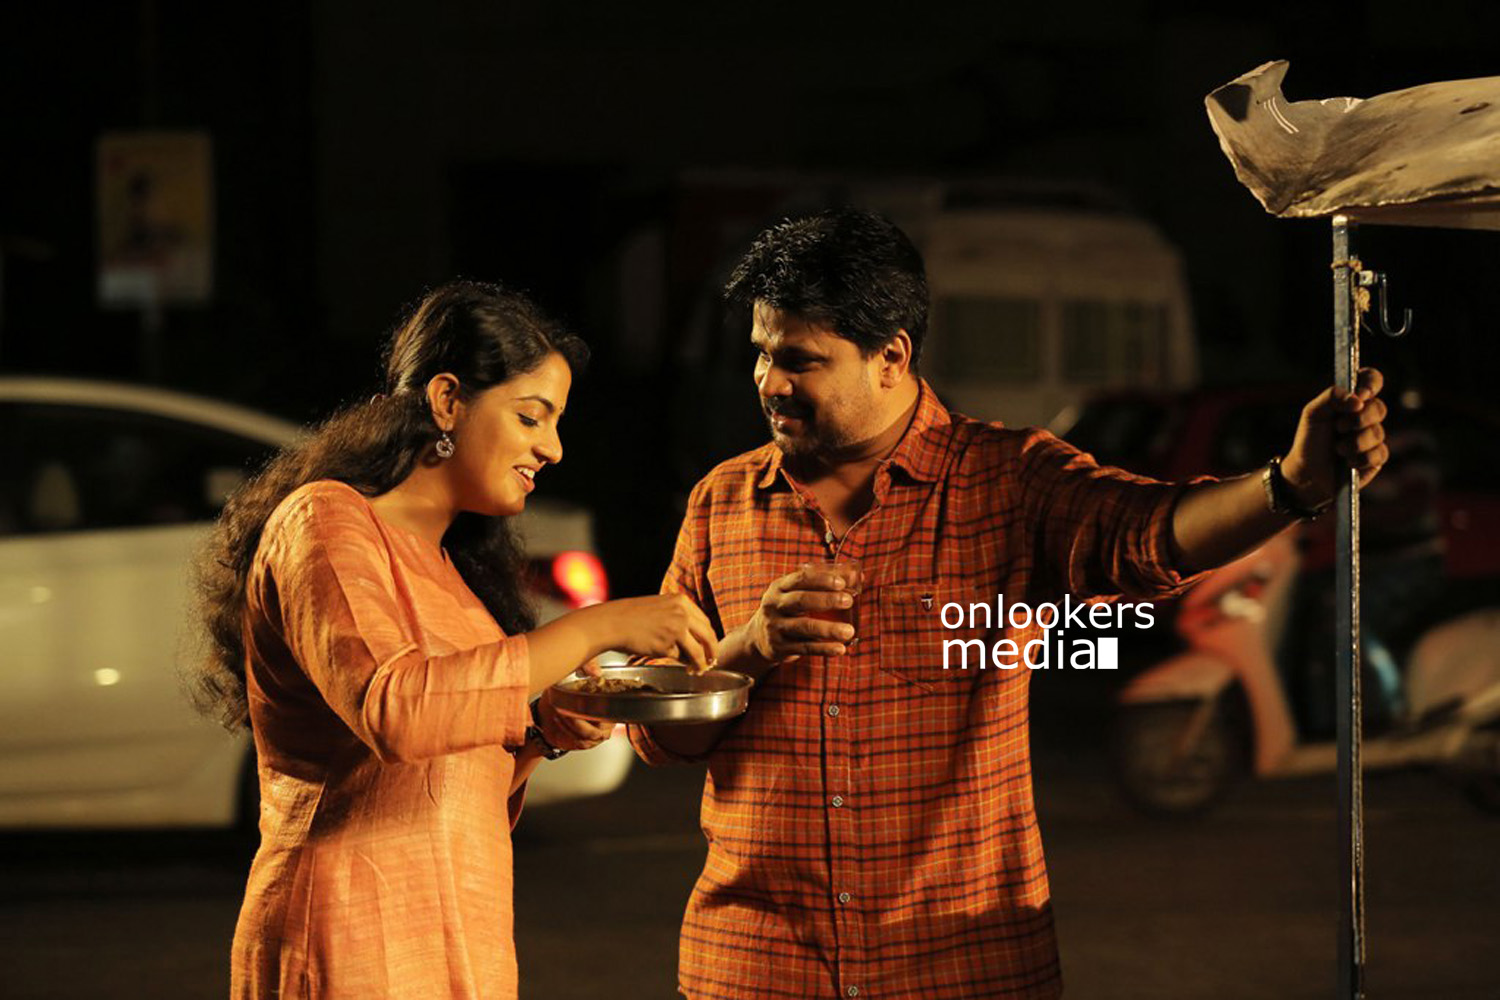 http://onlookersmedia.in/wp-content/uploads/2015/07/Dileep-and-Nikhila-Vimal-in-Love-24X7-Stills-Images-Photos-15.jpg